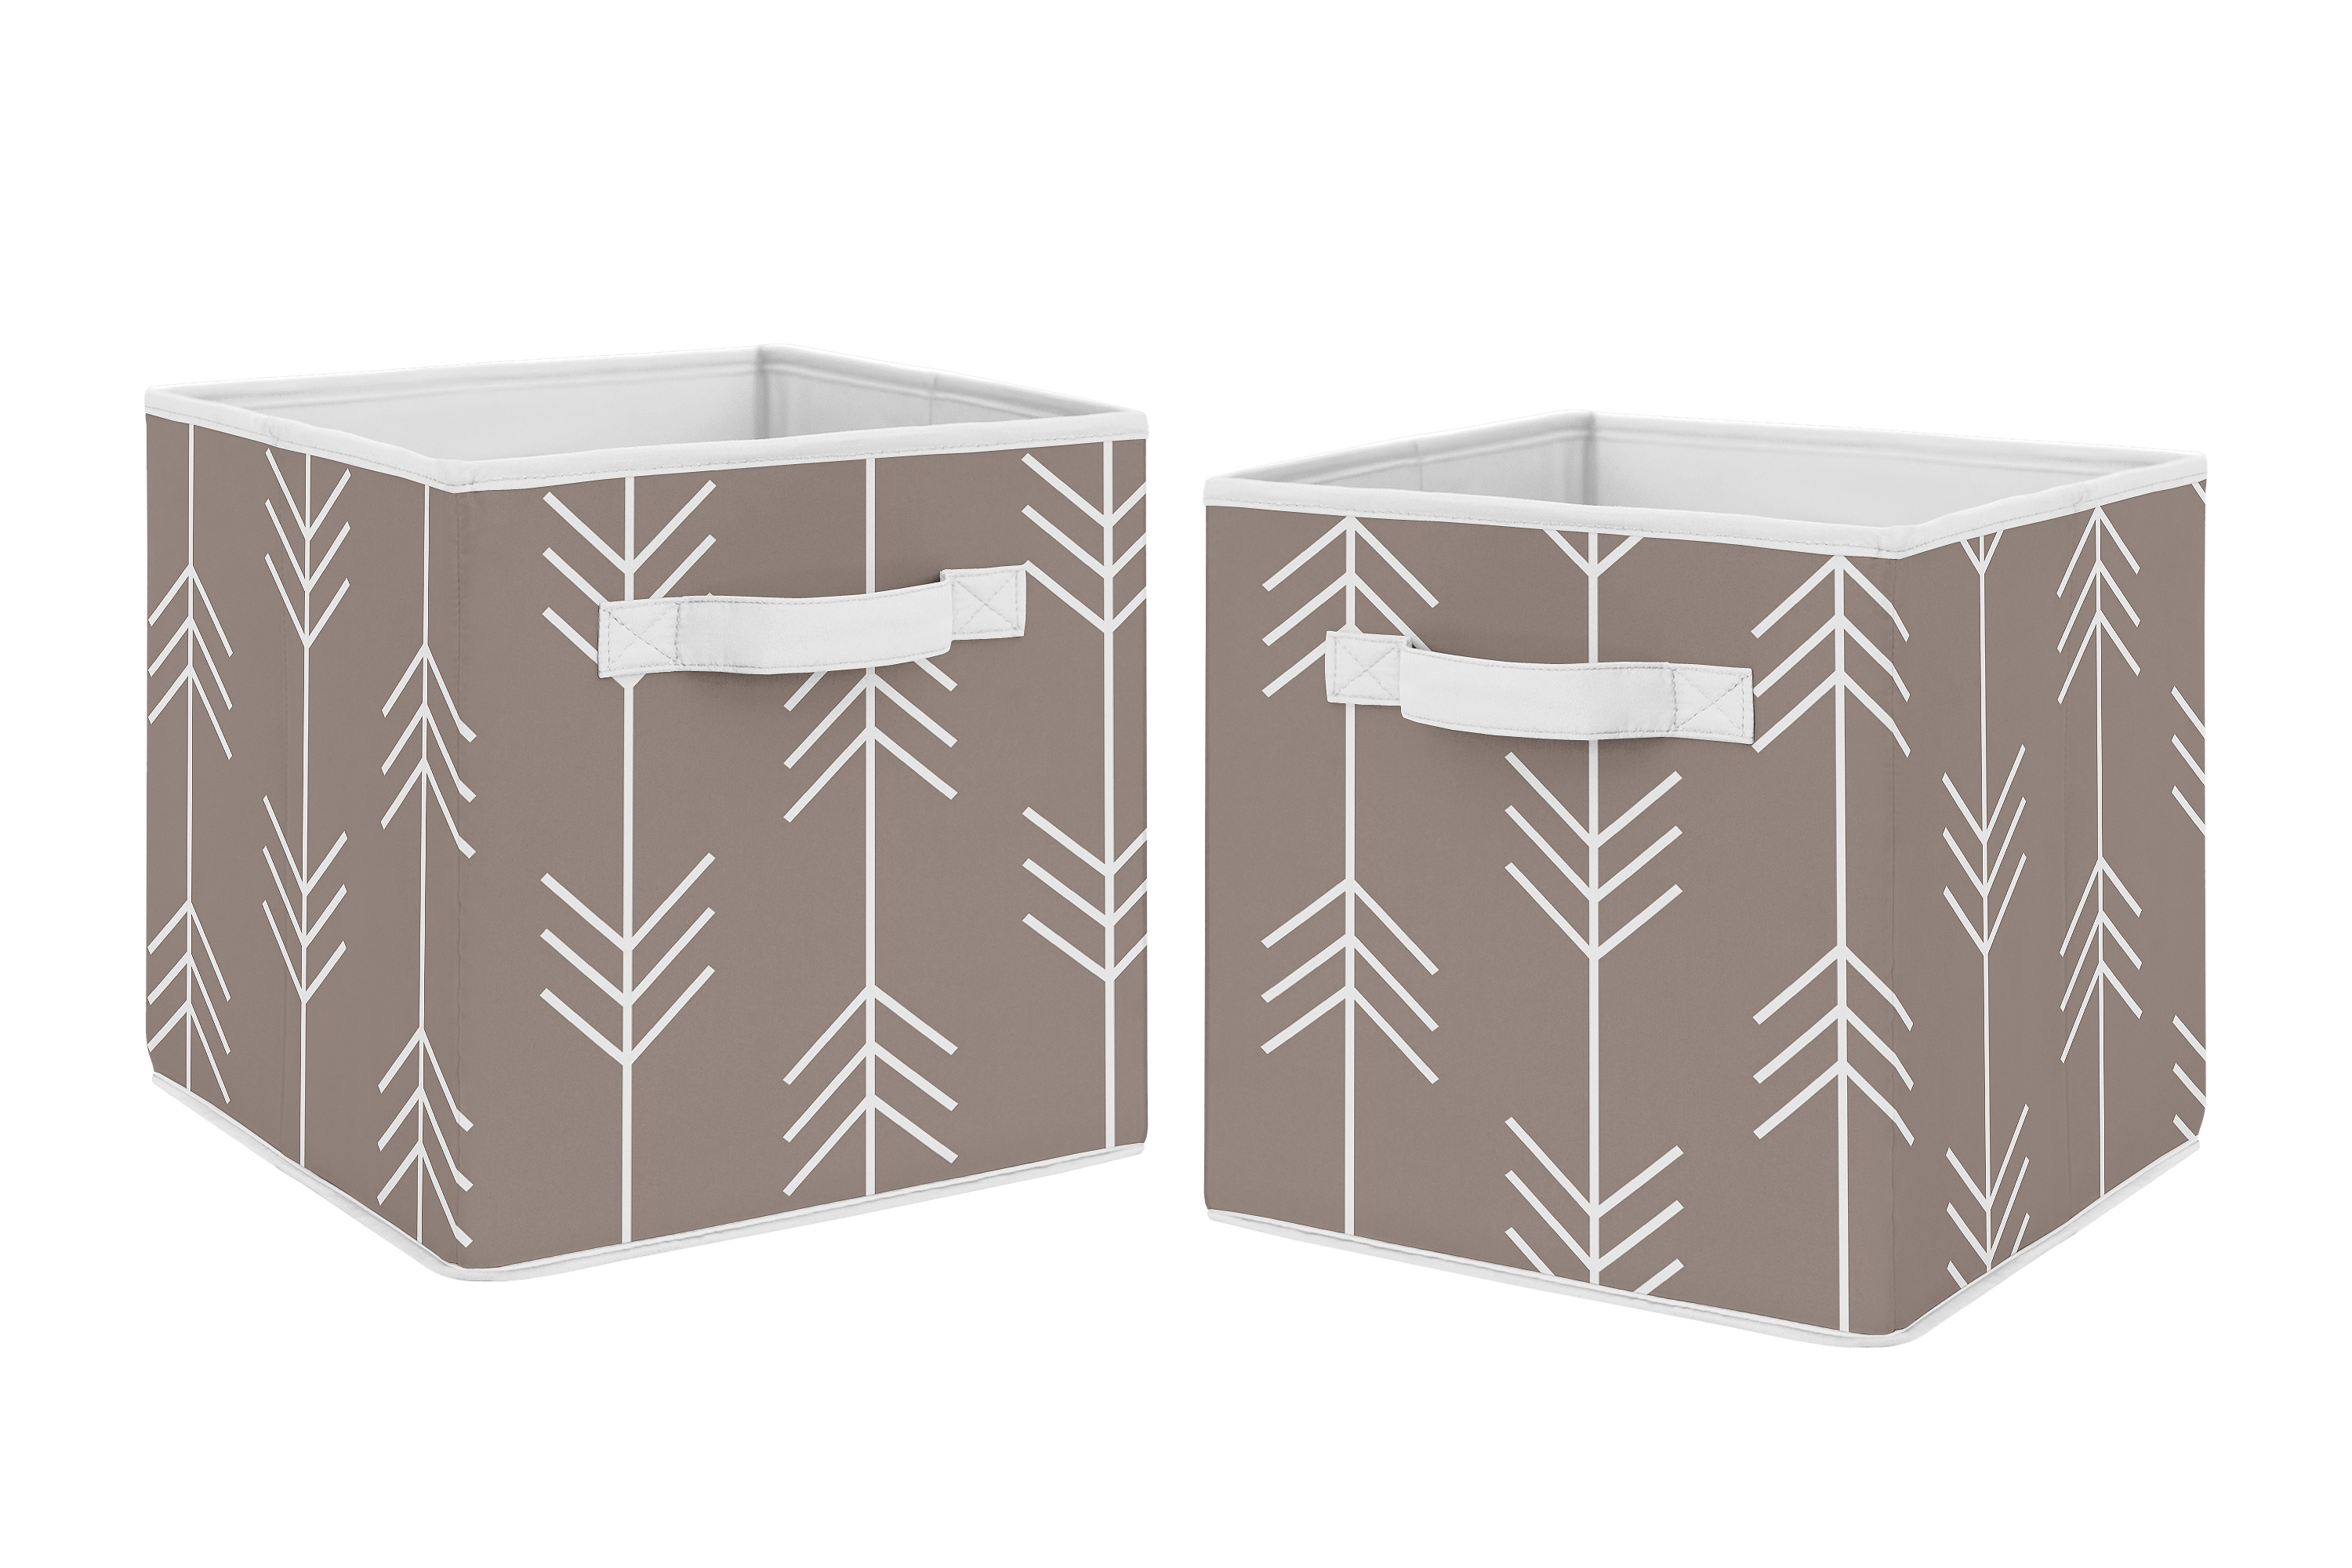 Details About Stone Arrow Outdoor Adventure Foldable Fabric Storage Cube Bins Boxes 2pc Set in dimensions 3000 X 2000